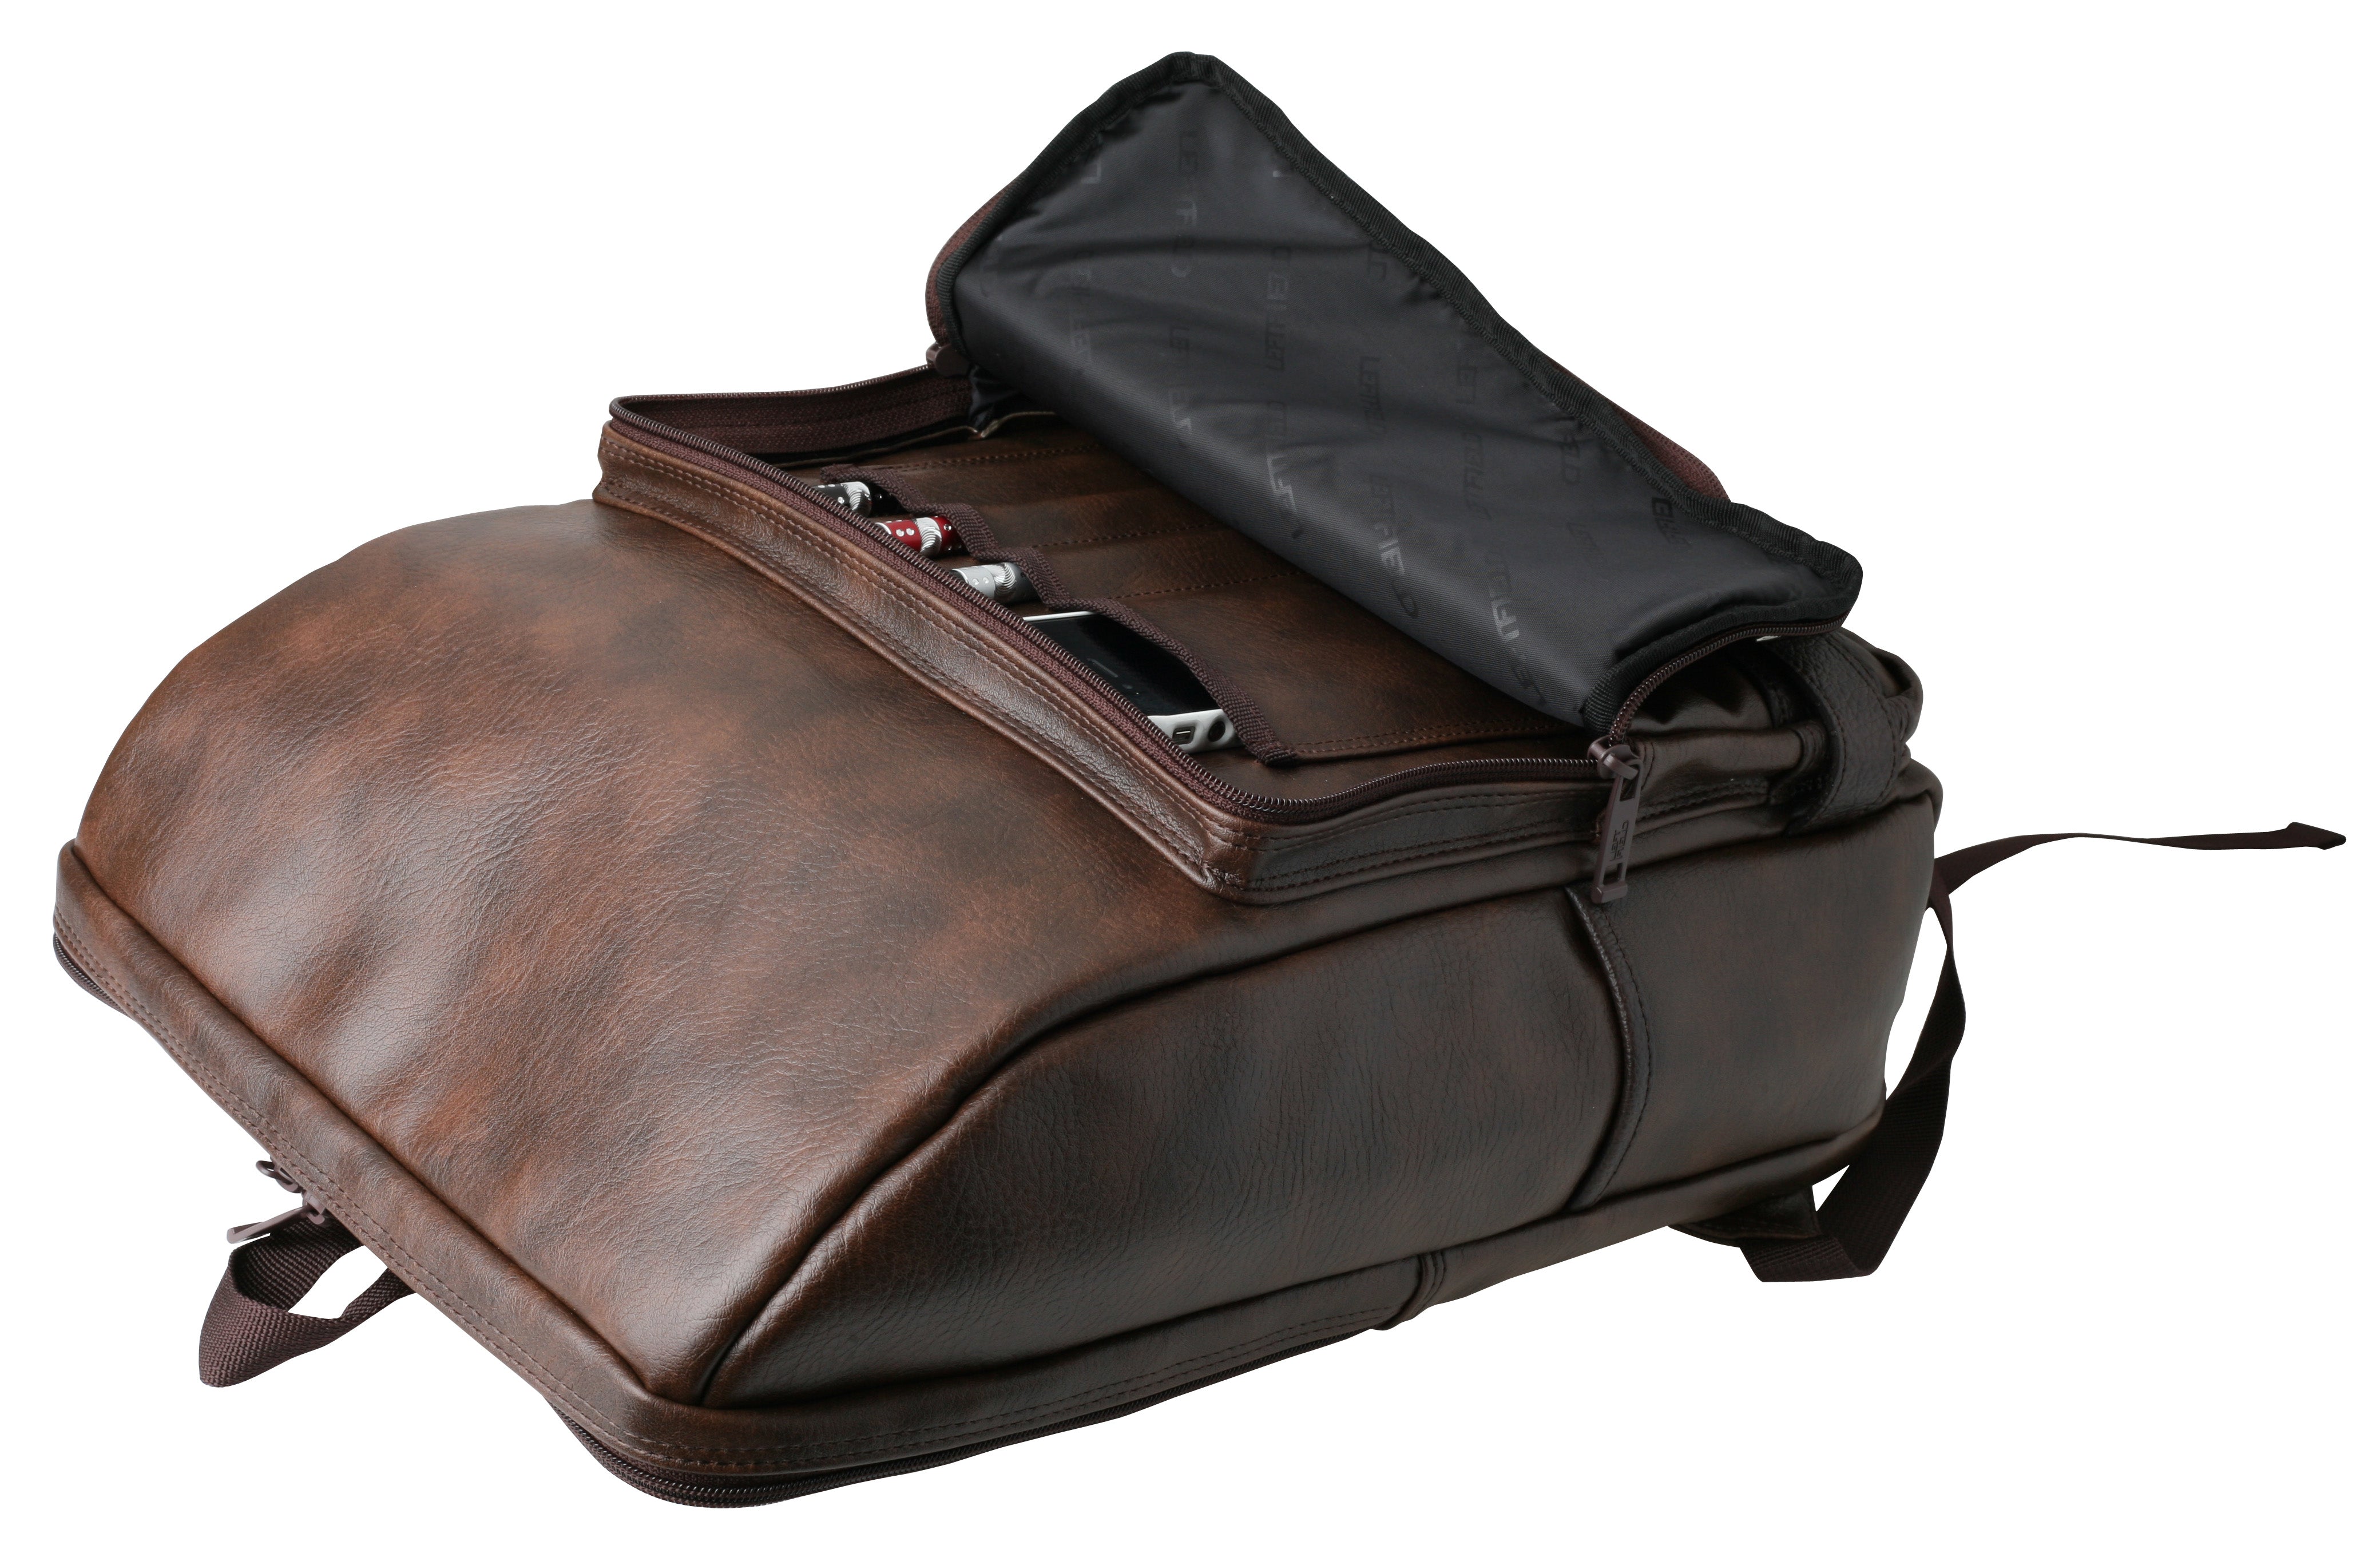 Dark Brown Synthetic Leather Casual Laptop Backpacks